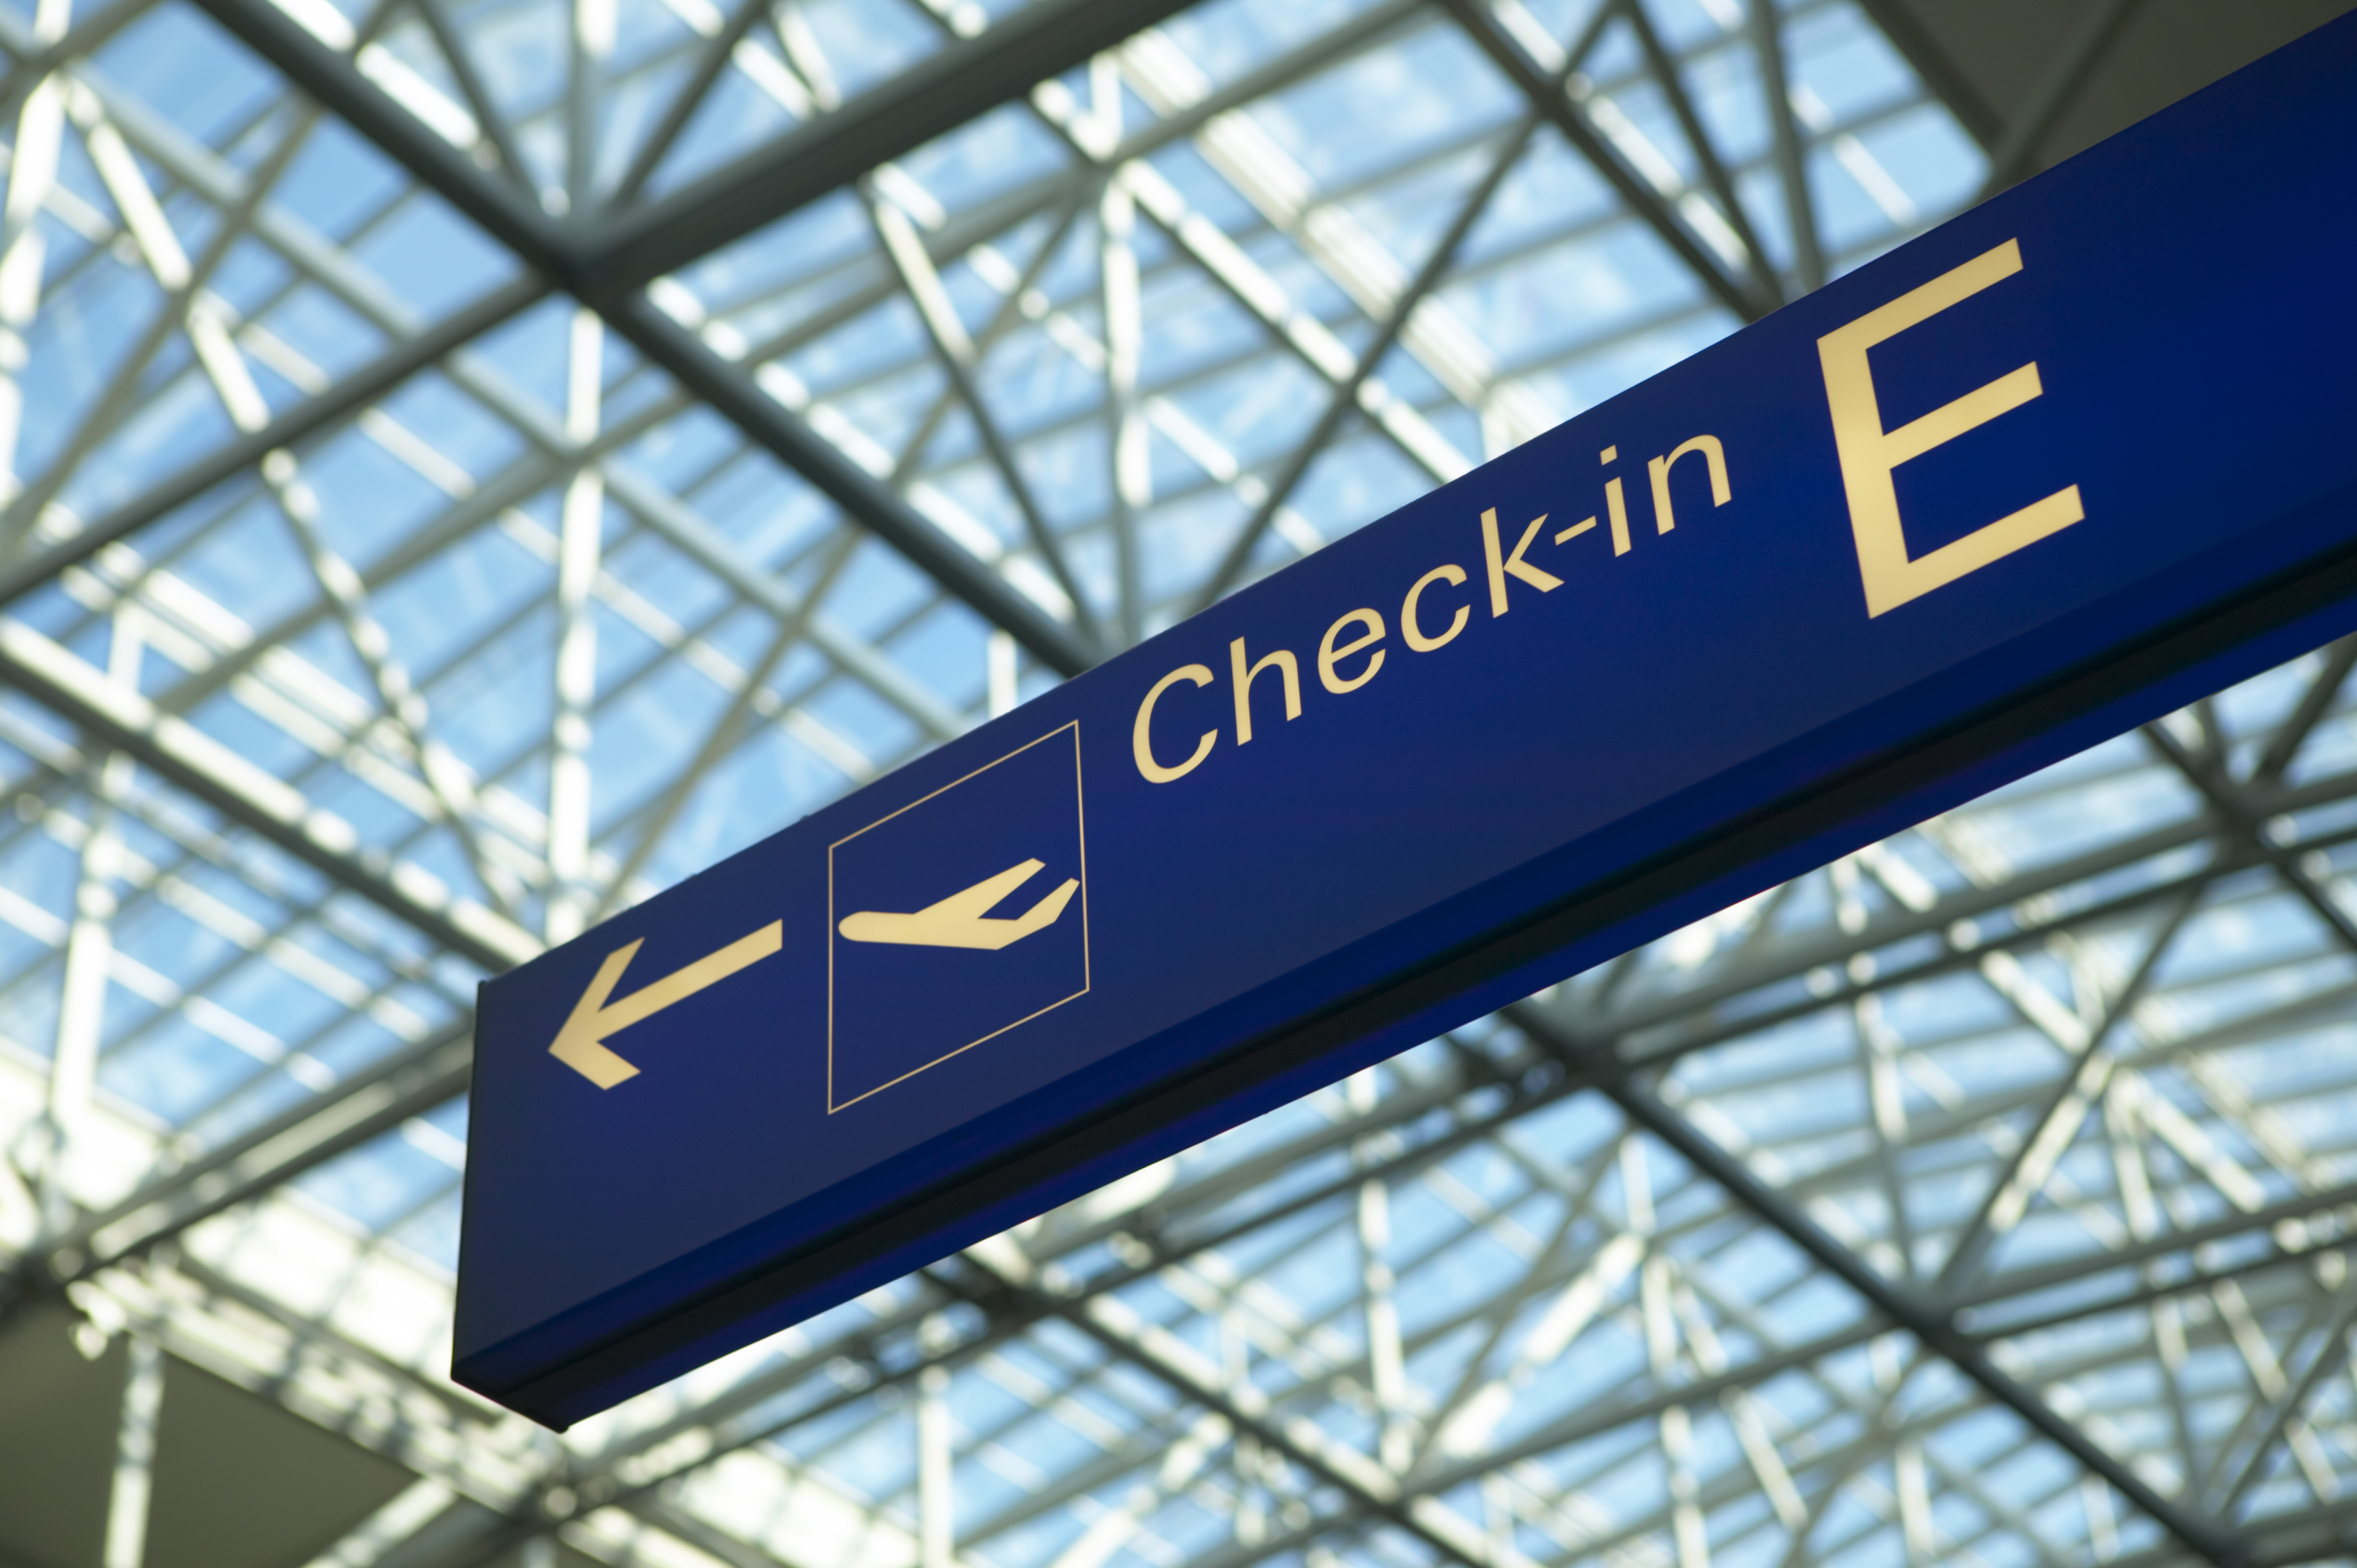 Check-in sign at airport, low angle view